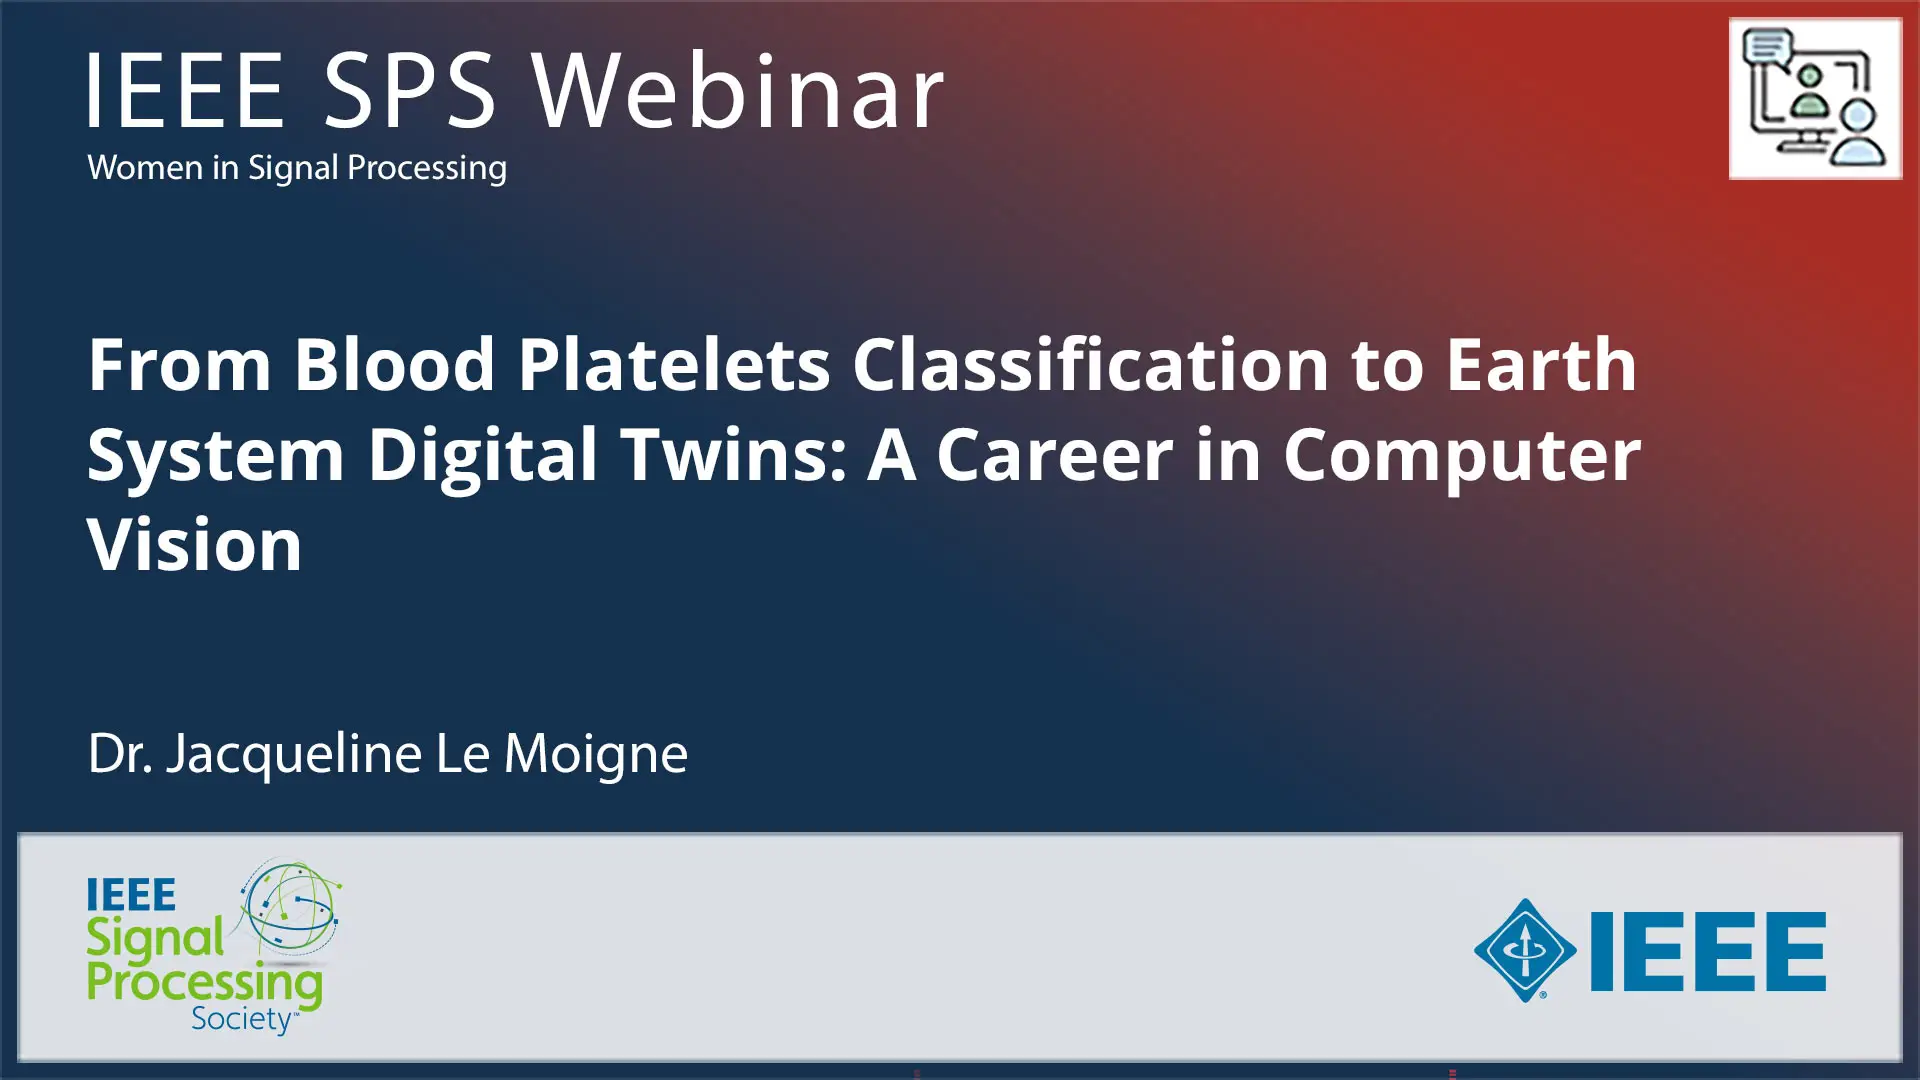 Blood Platelets Classification to Earth System Digital Twins: A Career in Computer Vision